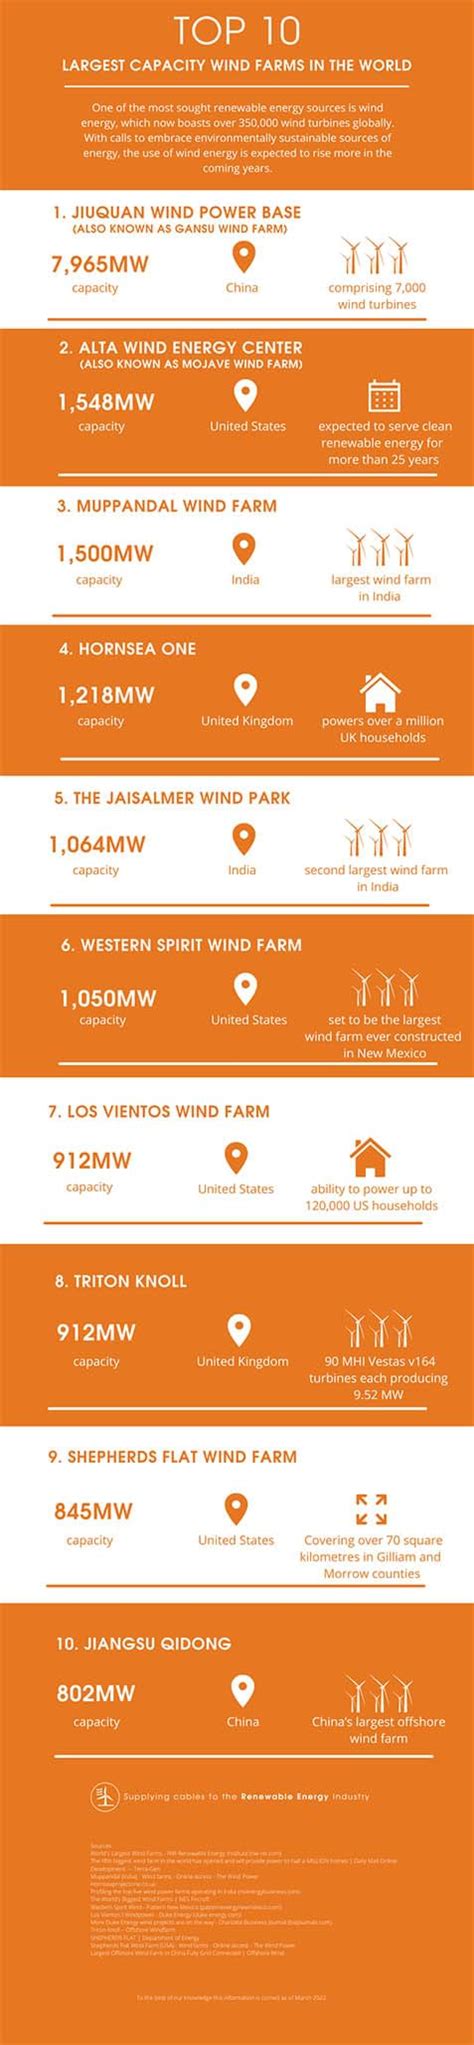 Global Top 10 Wind Farms by Capacity | Eland Cables